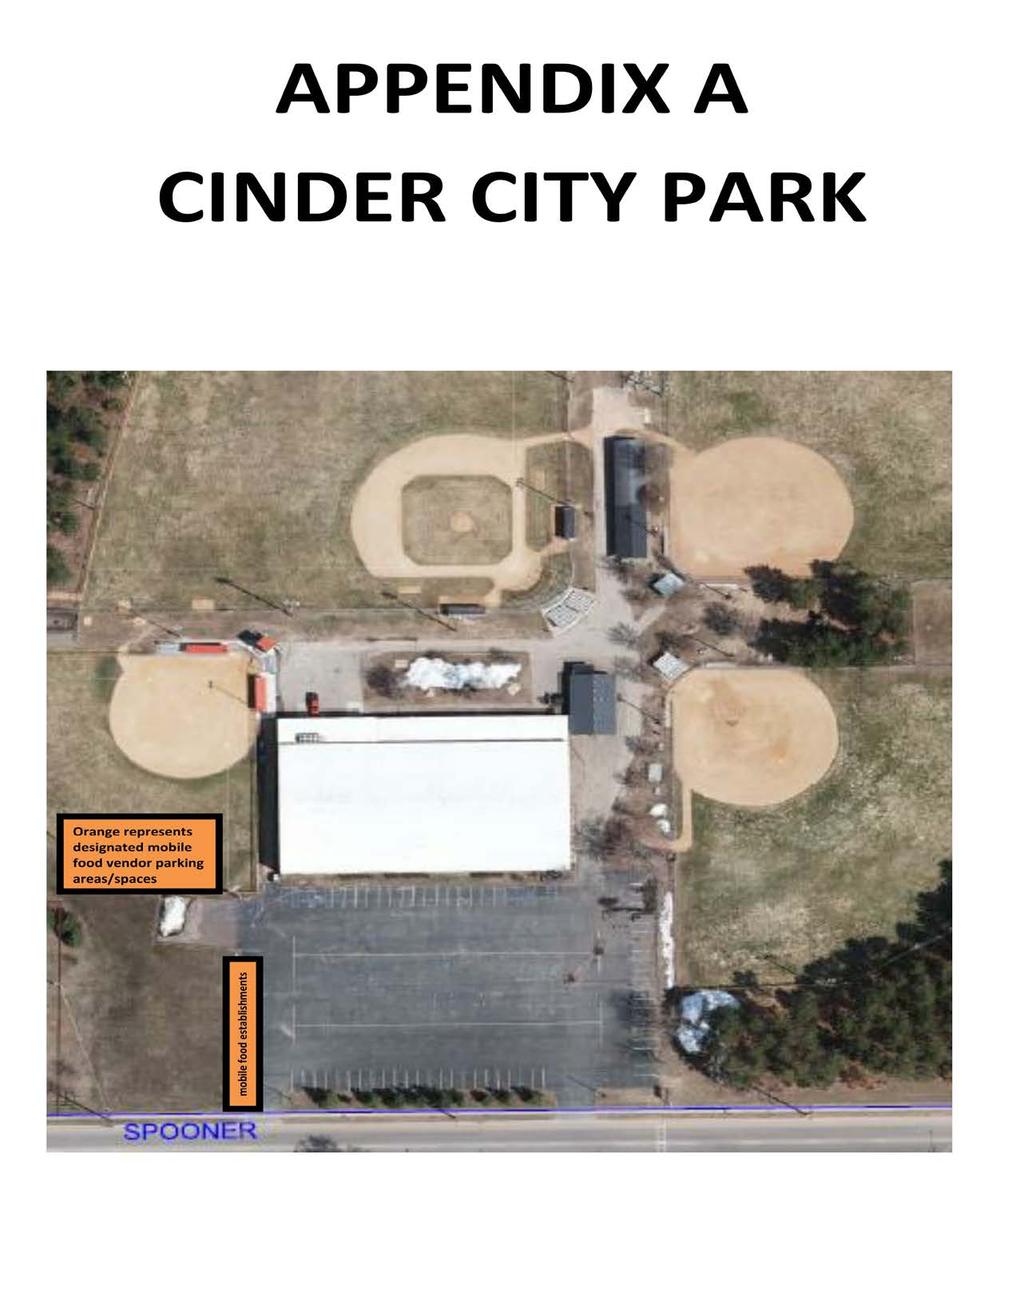 Cinder City Park Locations: Three (3) mobile food vendors may conduct business in designated parking area (14 spaces) on the west side of the Cinder City Park parking lot area.